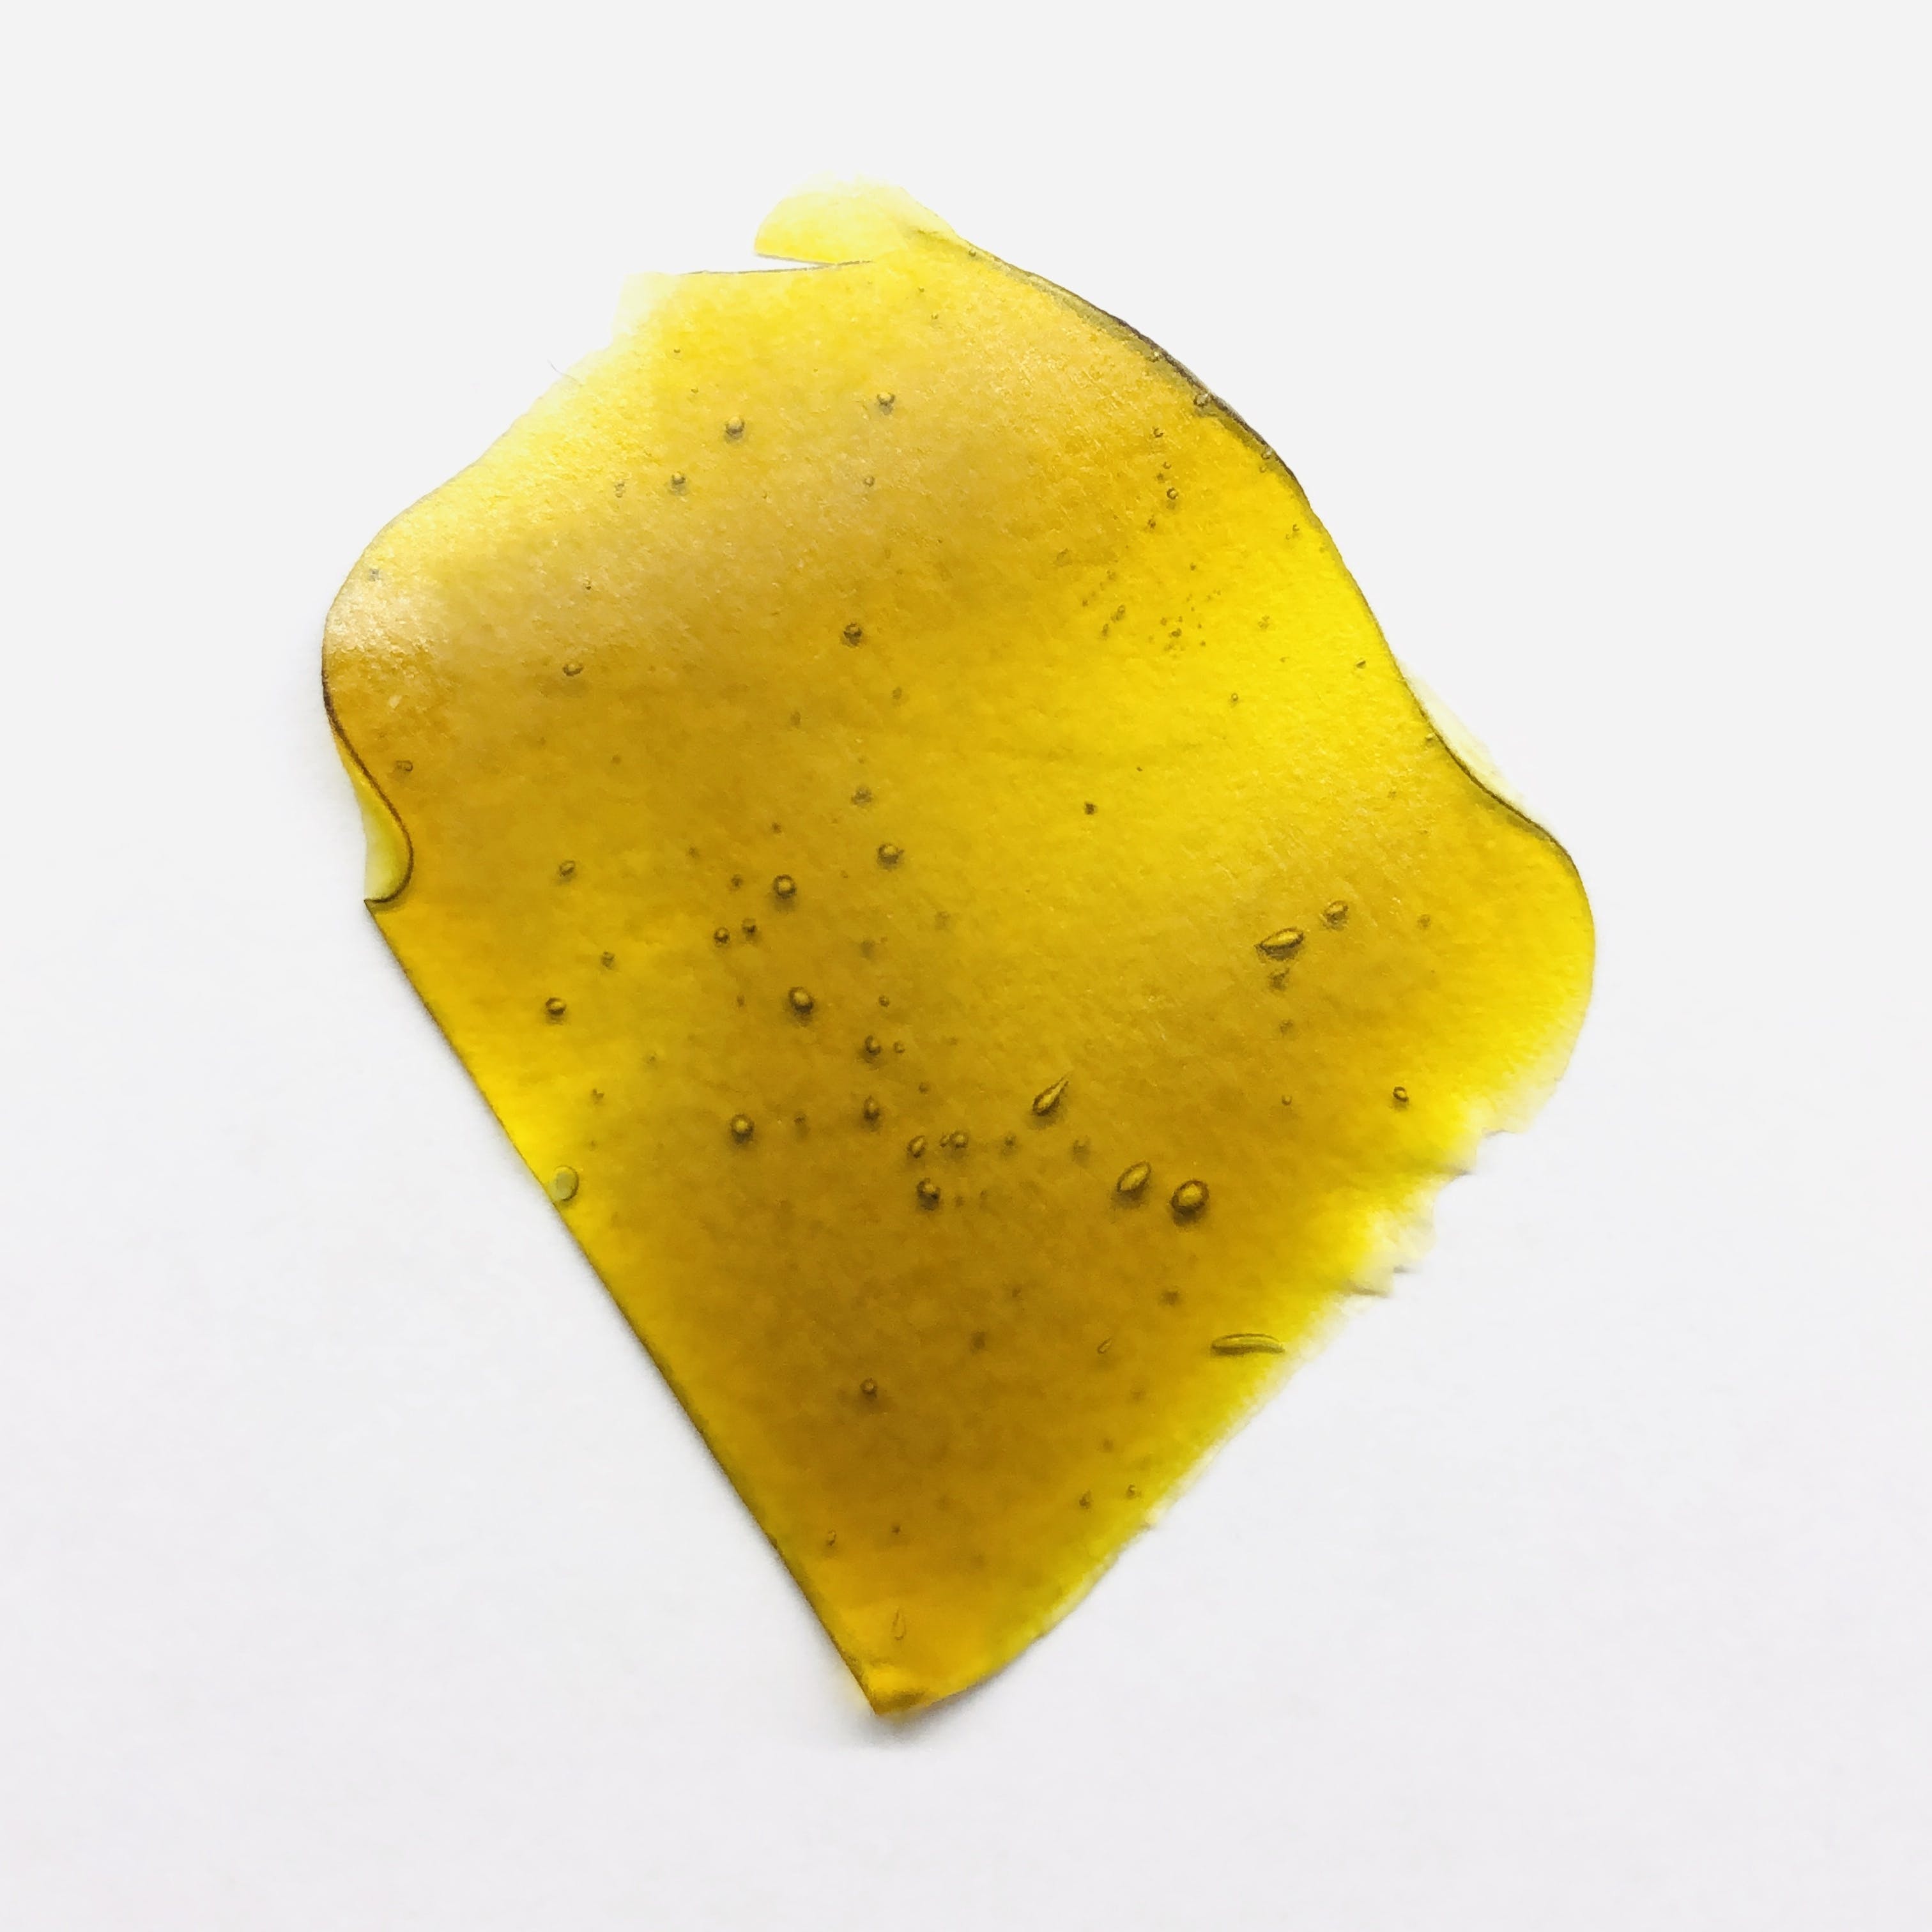 wax-2420-house-shatter